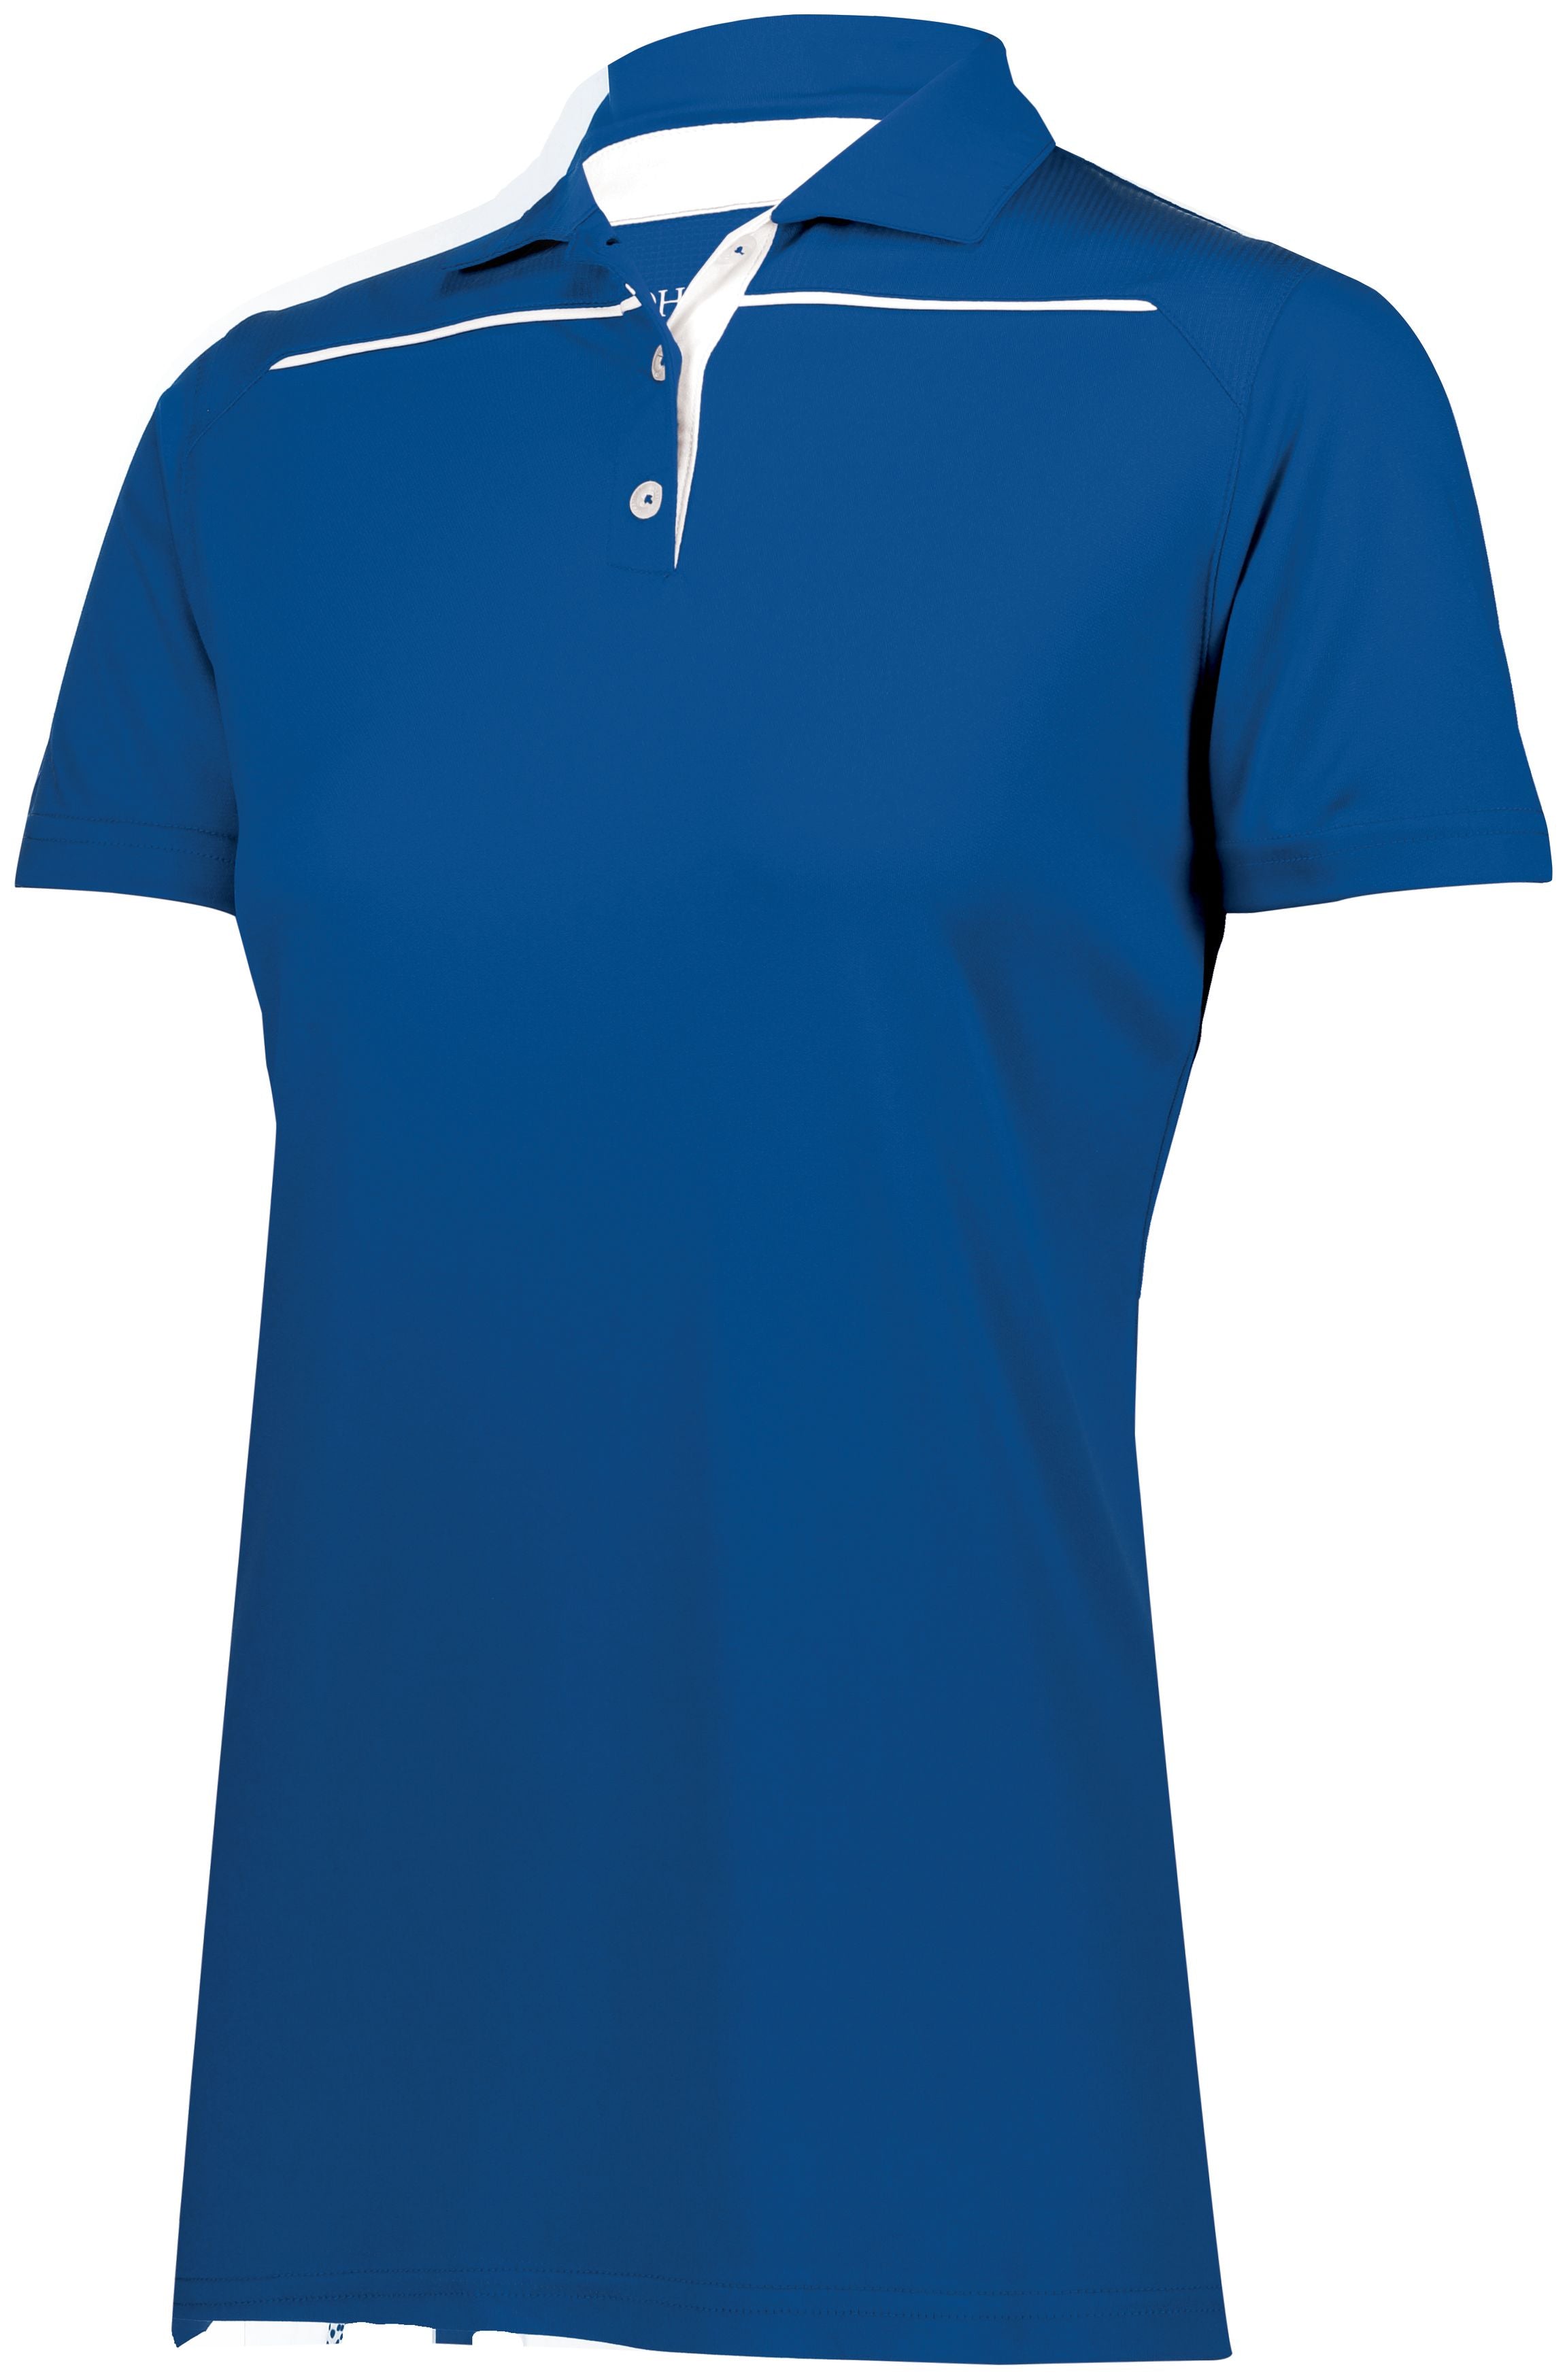 Holloway Ladies Defer Polo in Royal/White  -Part of the Ladies, Ladies-Polo, Polos, Holloway, Shirts product lines at KanaleyCreations.com